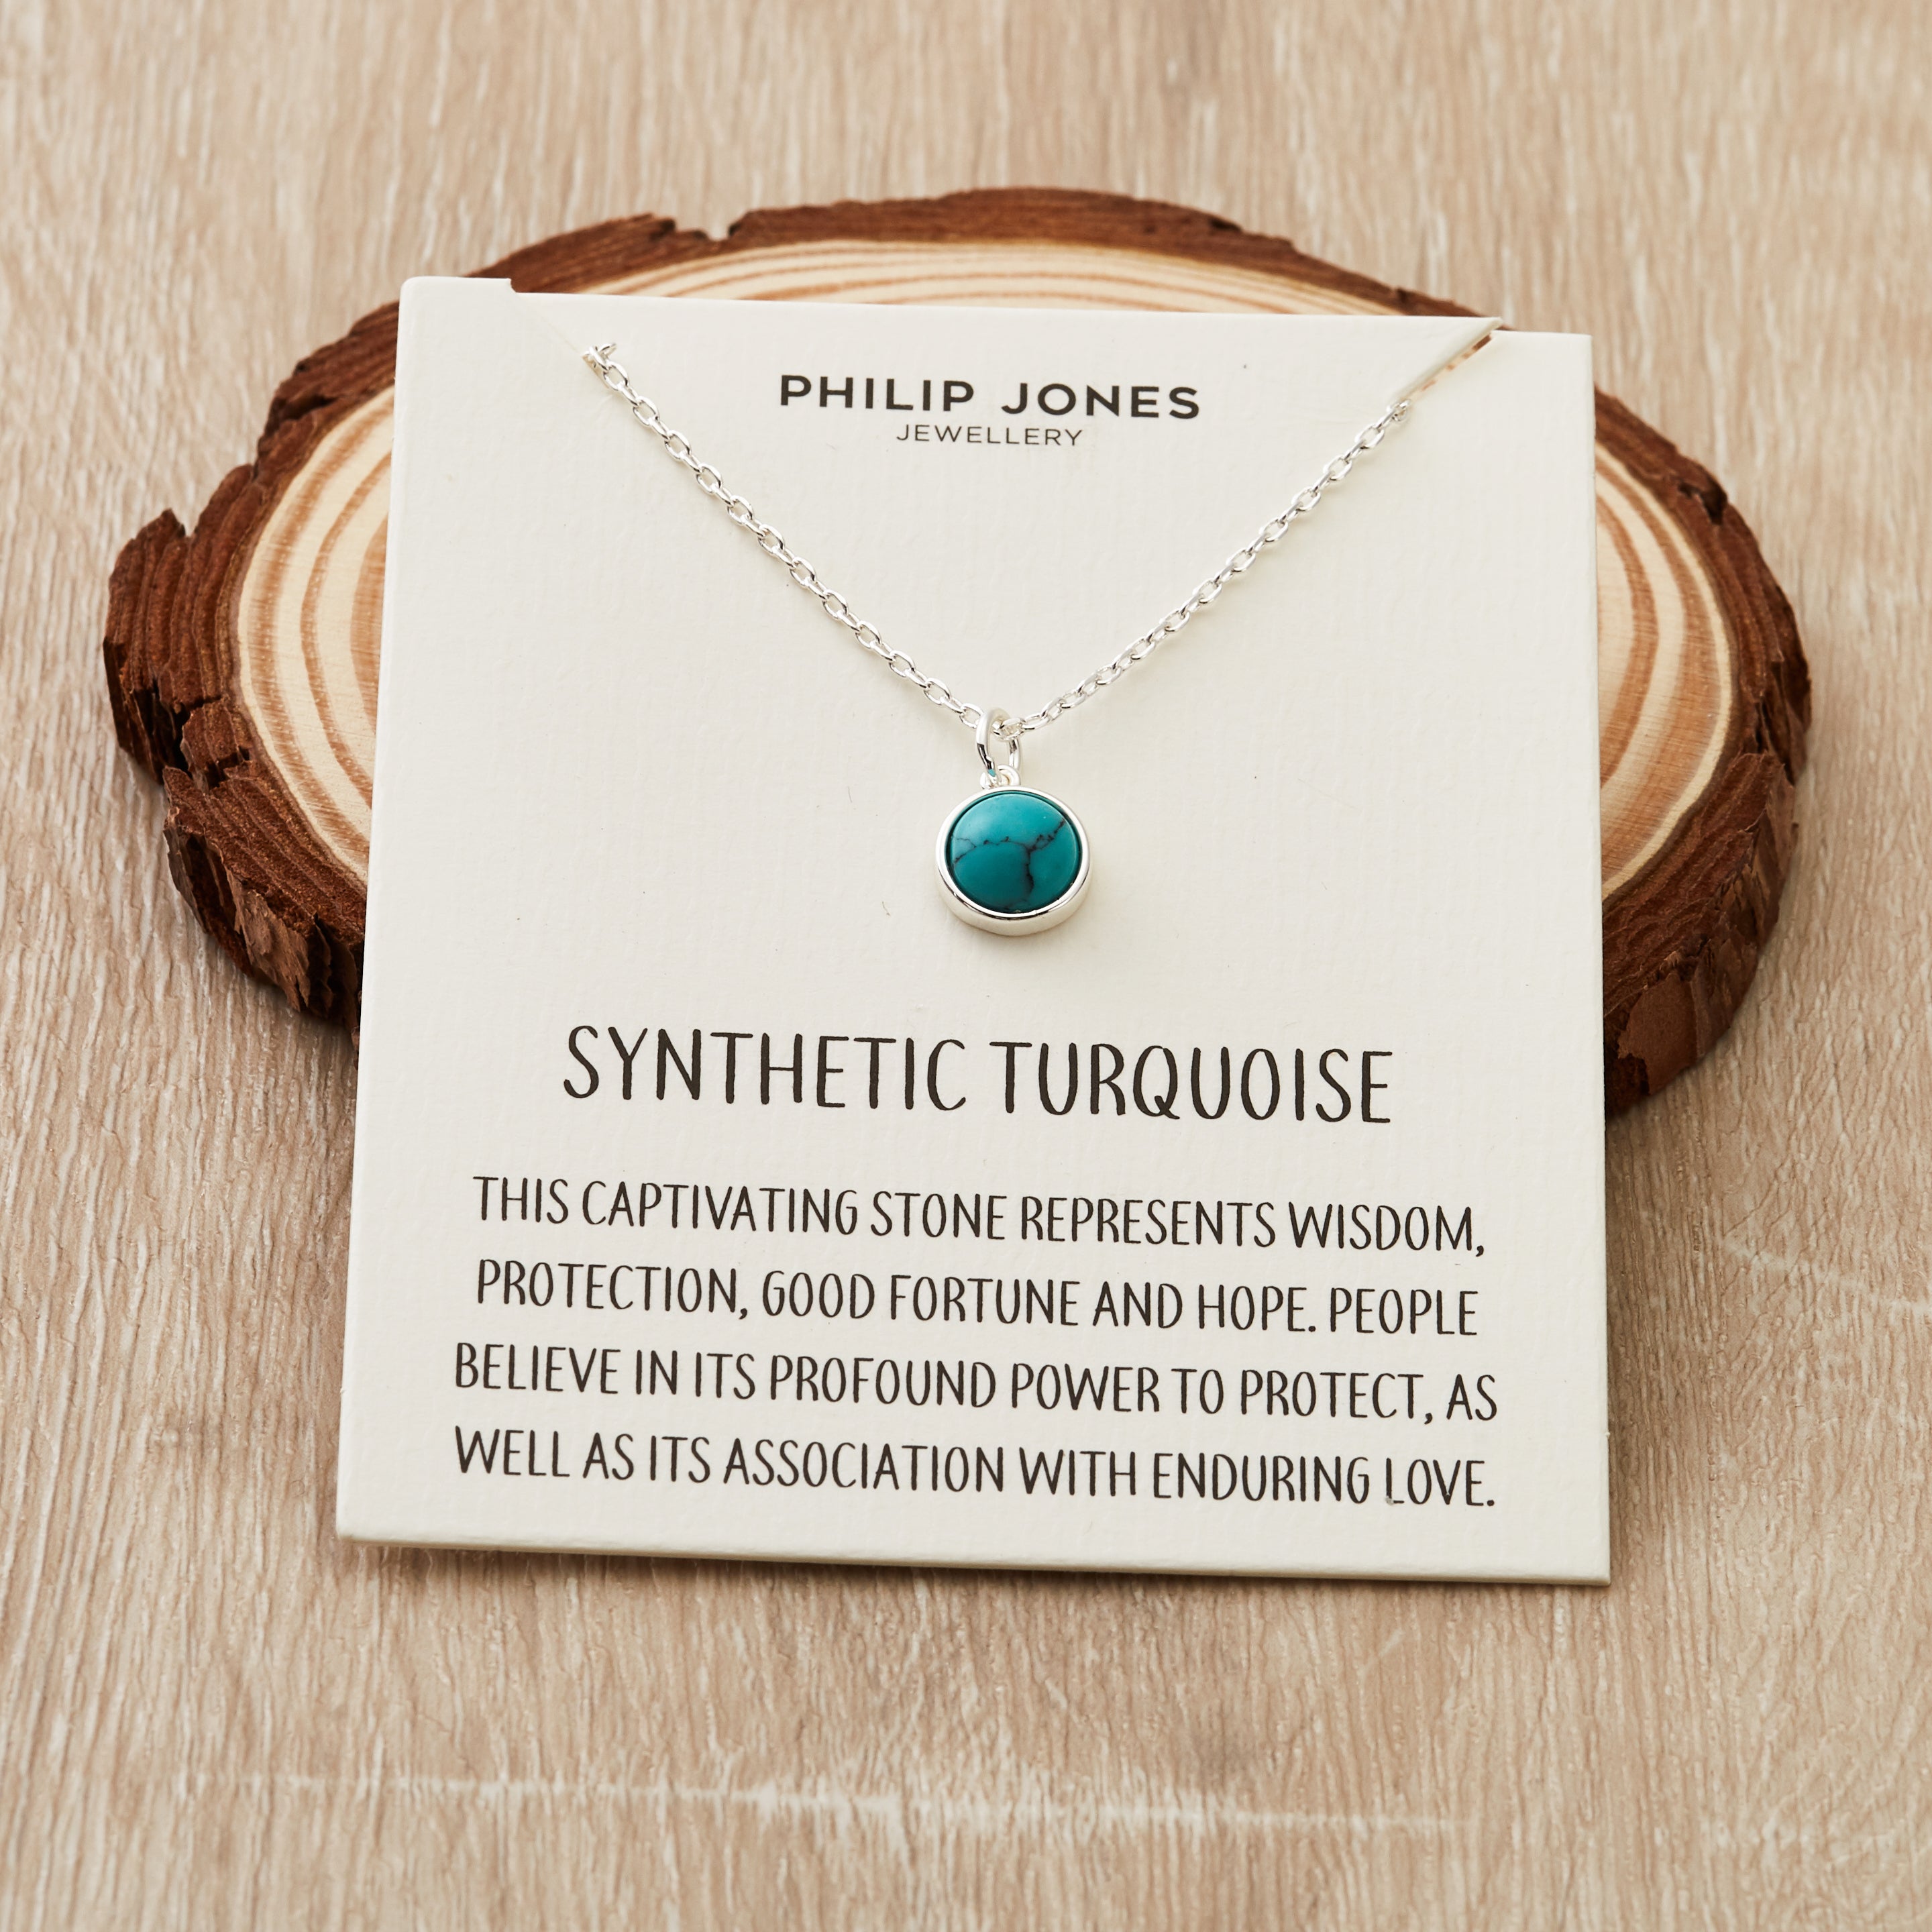 Synthetic Turquoise Necklace with Quote Card